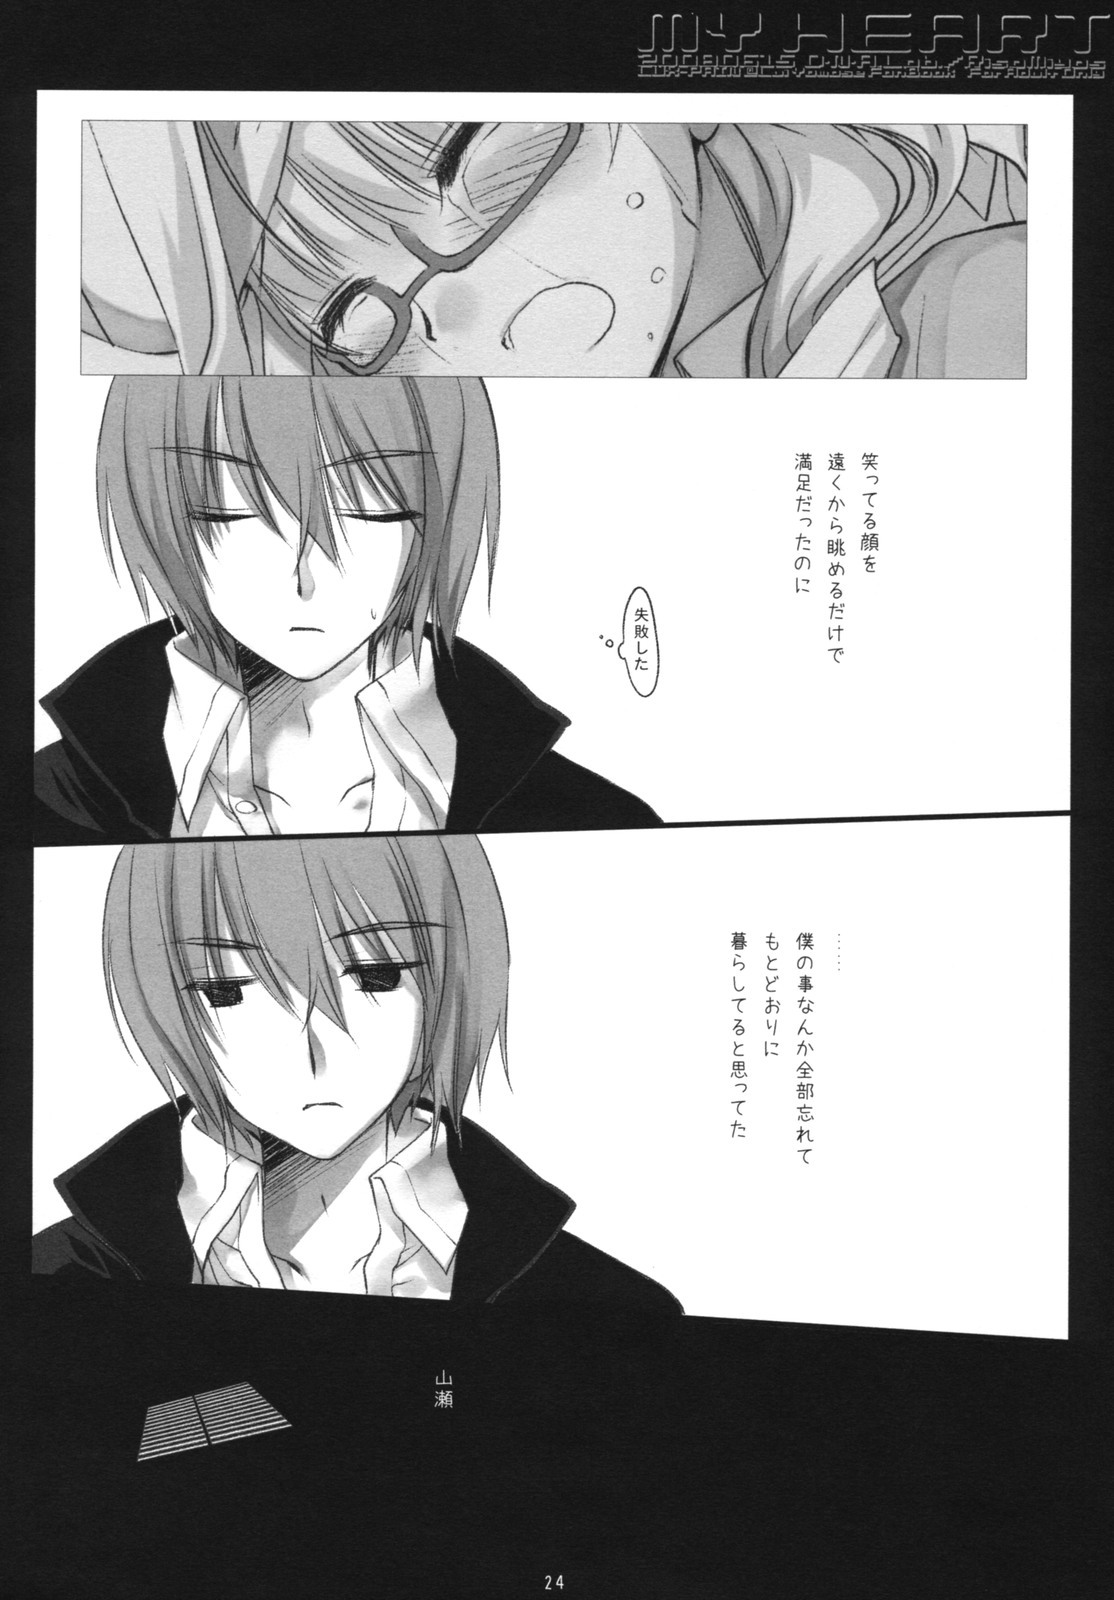 (SC40) [D.N.A.Lab. (Miyasu Risa)] MY HEART (LUX-PAIN) page 23 full